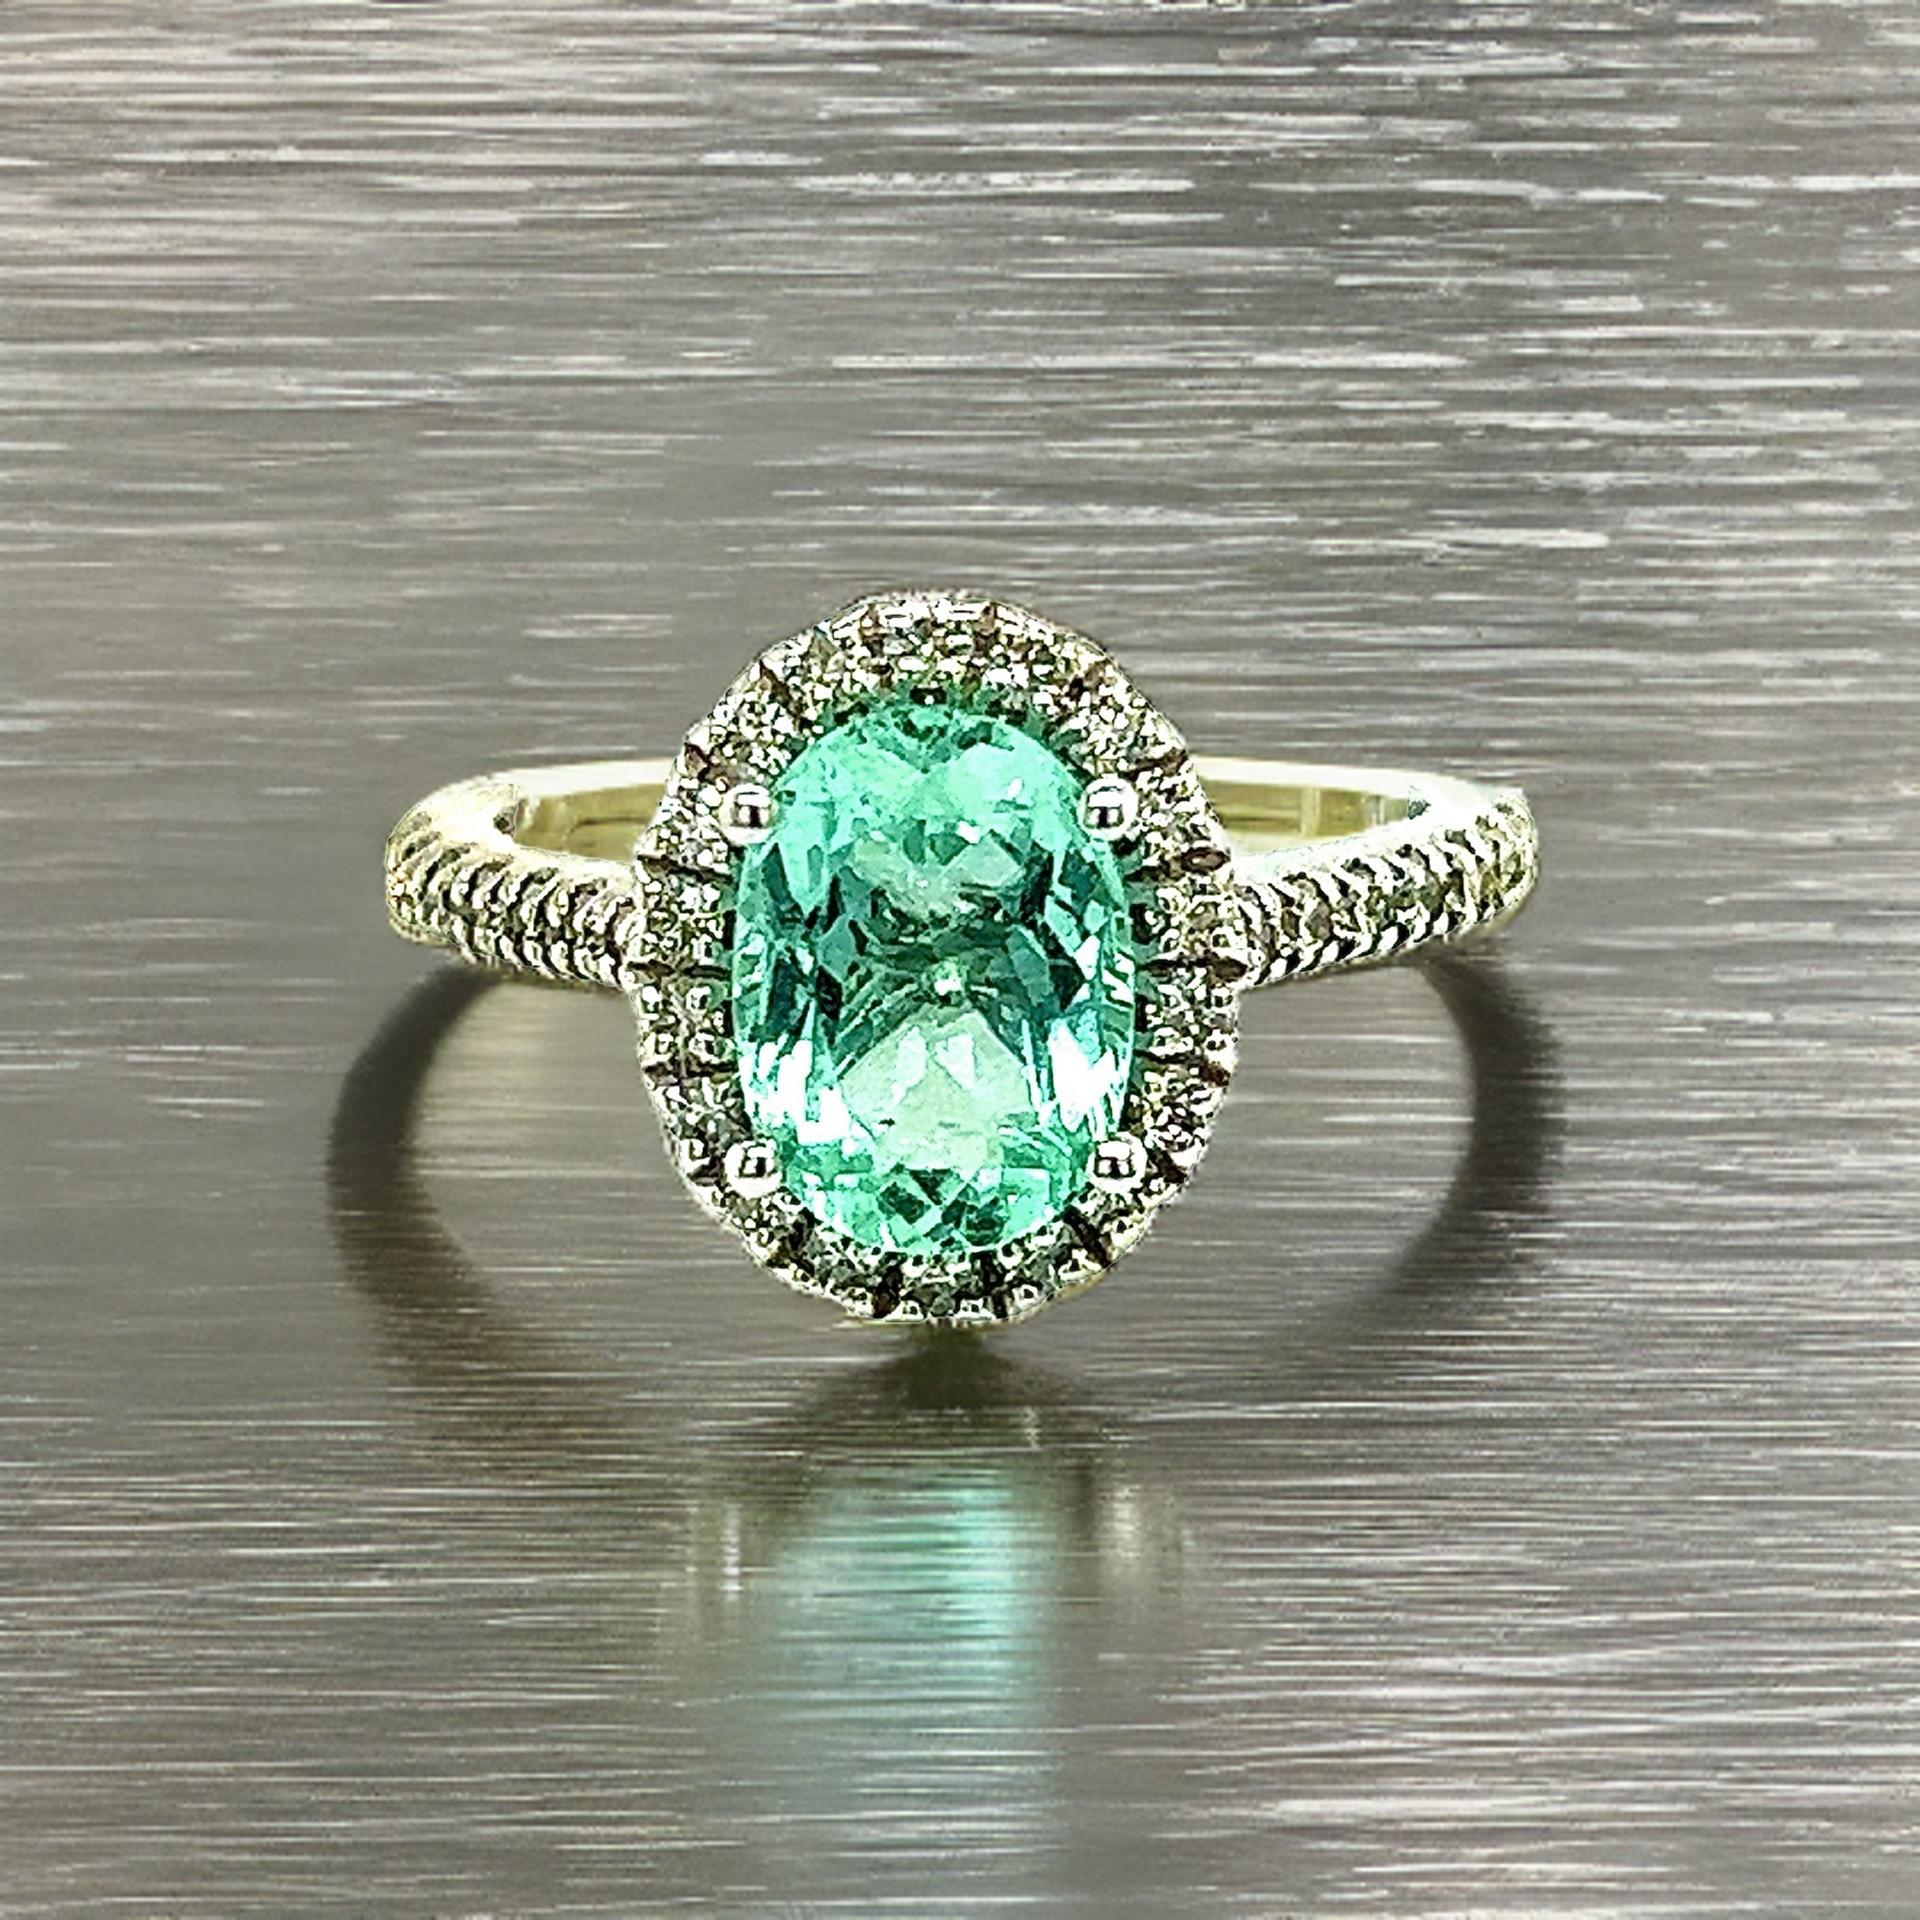 Oval Cut Natural Colombian Emerald Diamond Ring Size 6.5 14k W Gold 2.98 TCW Certified For Sale